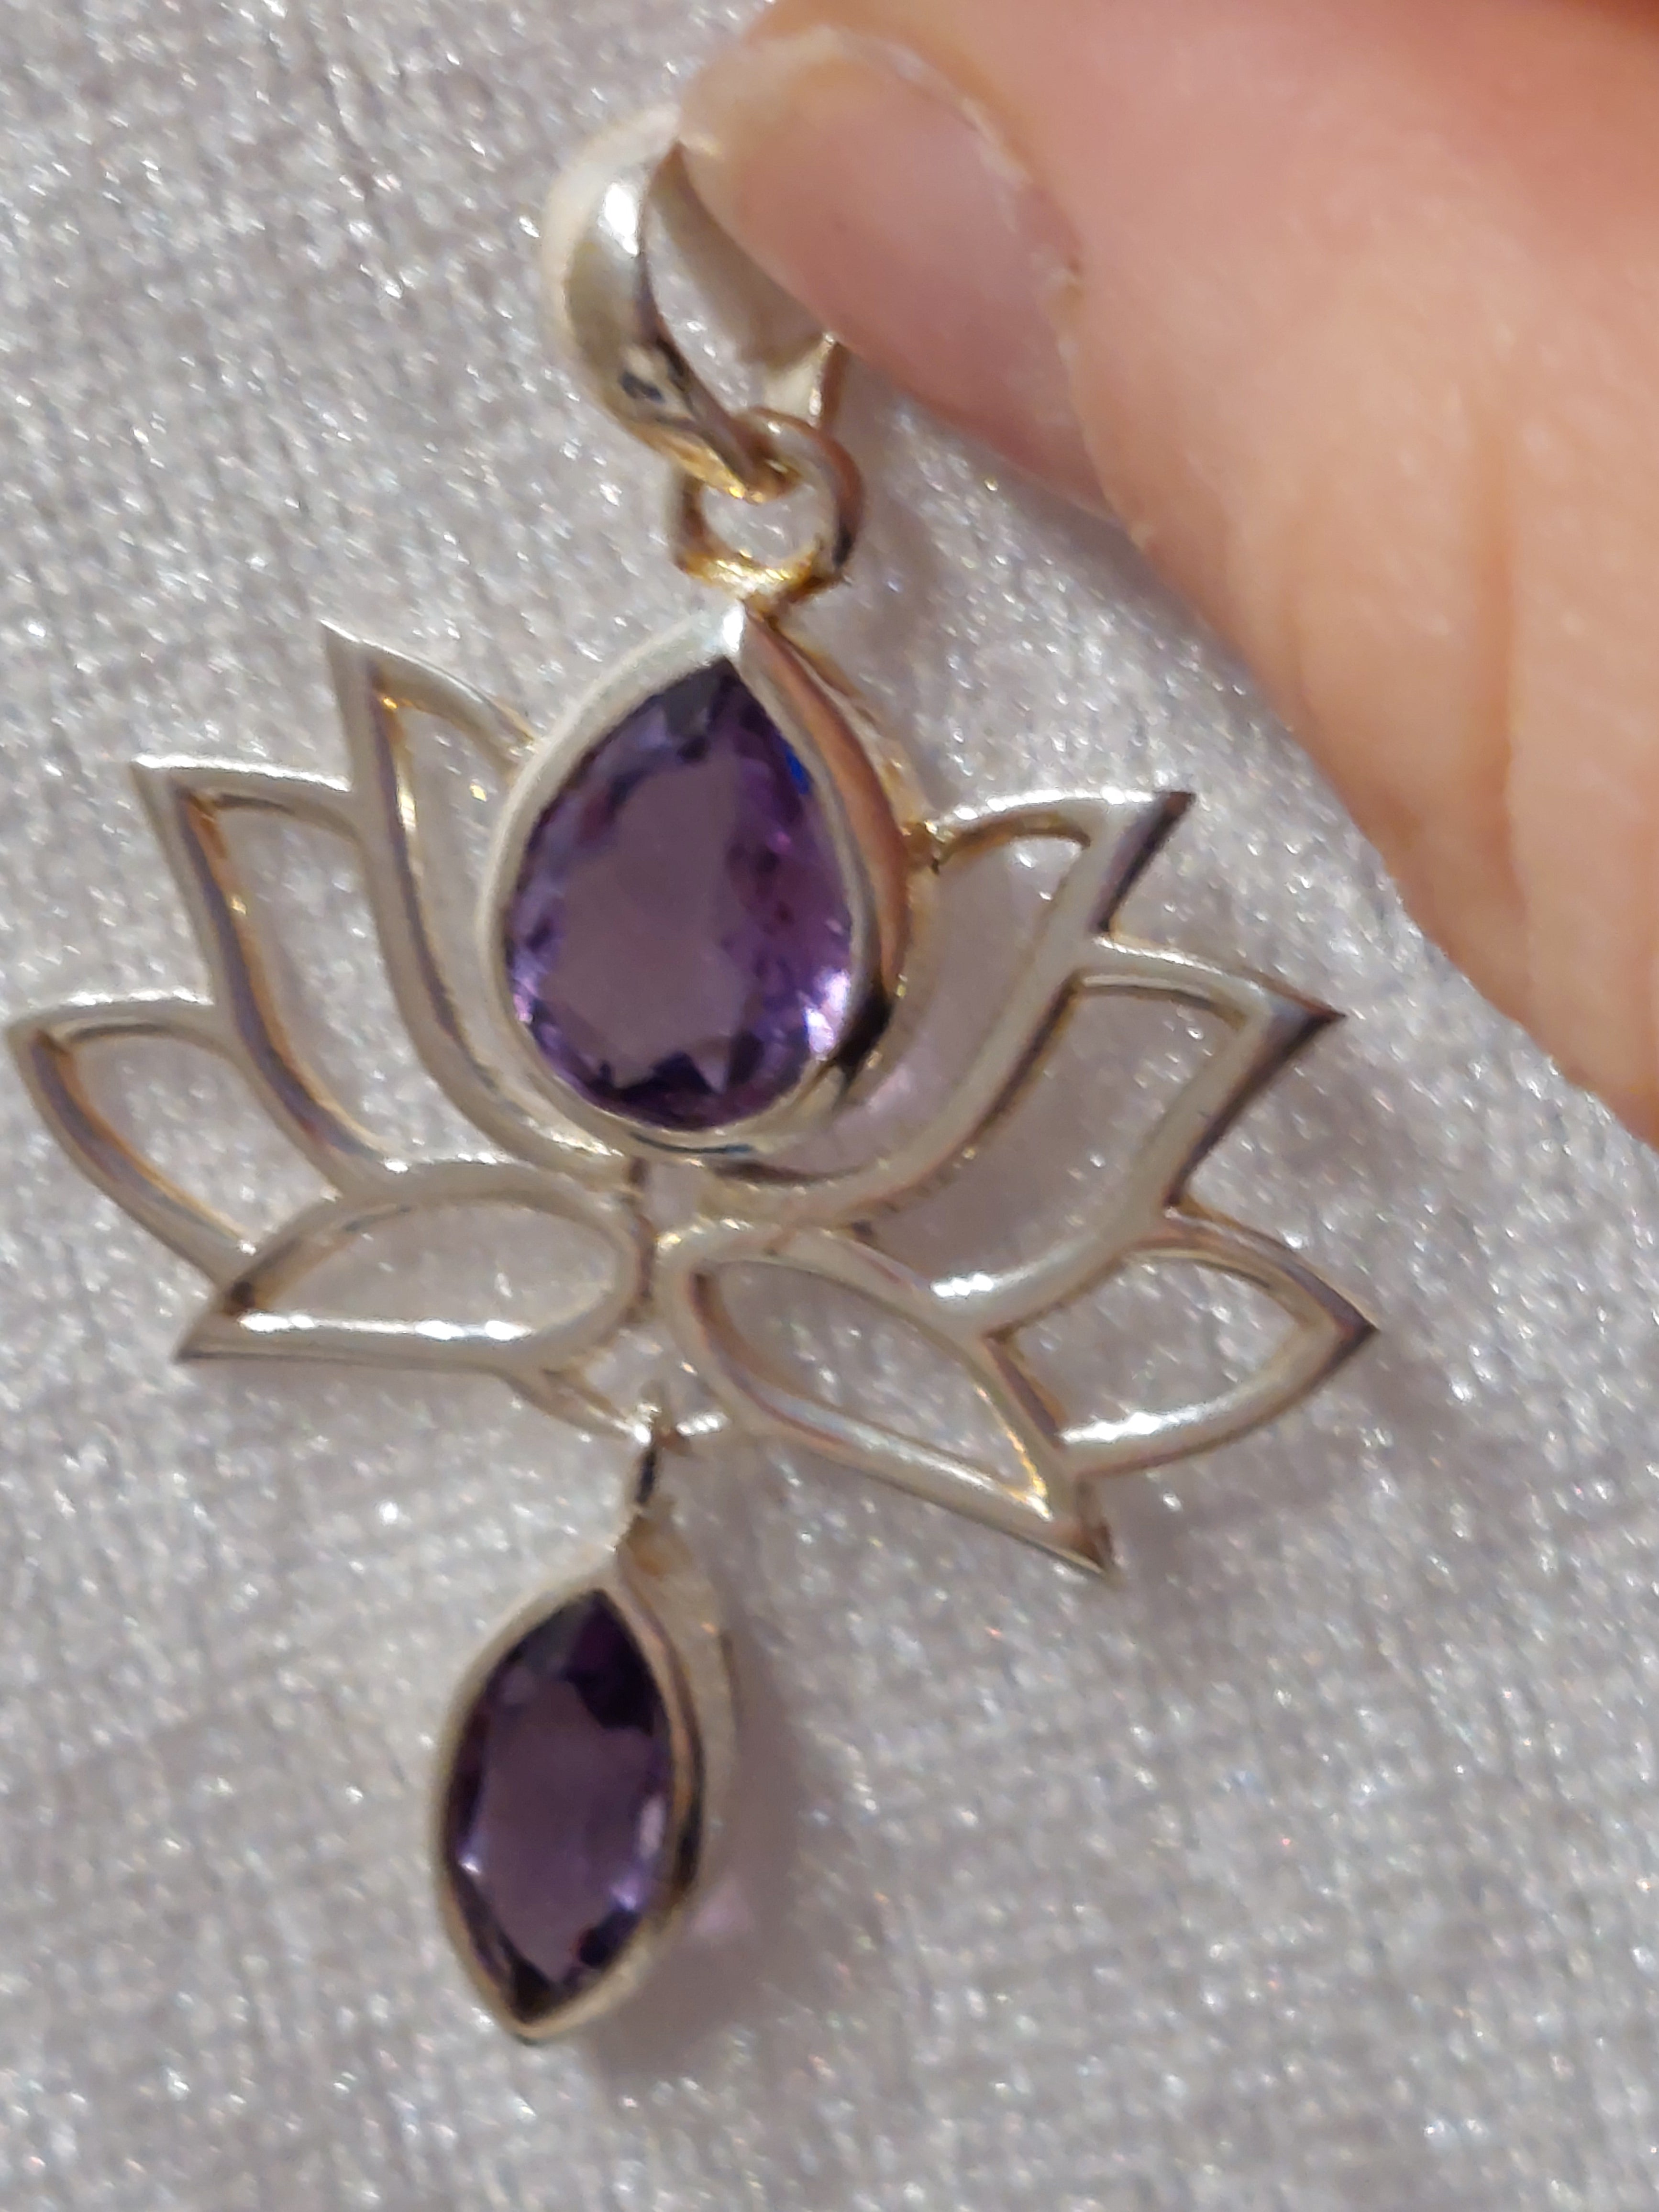 Lotus Flower Pendant with Faceted Amethyst - 925 Sterling Silver